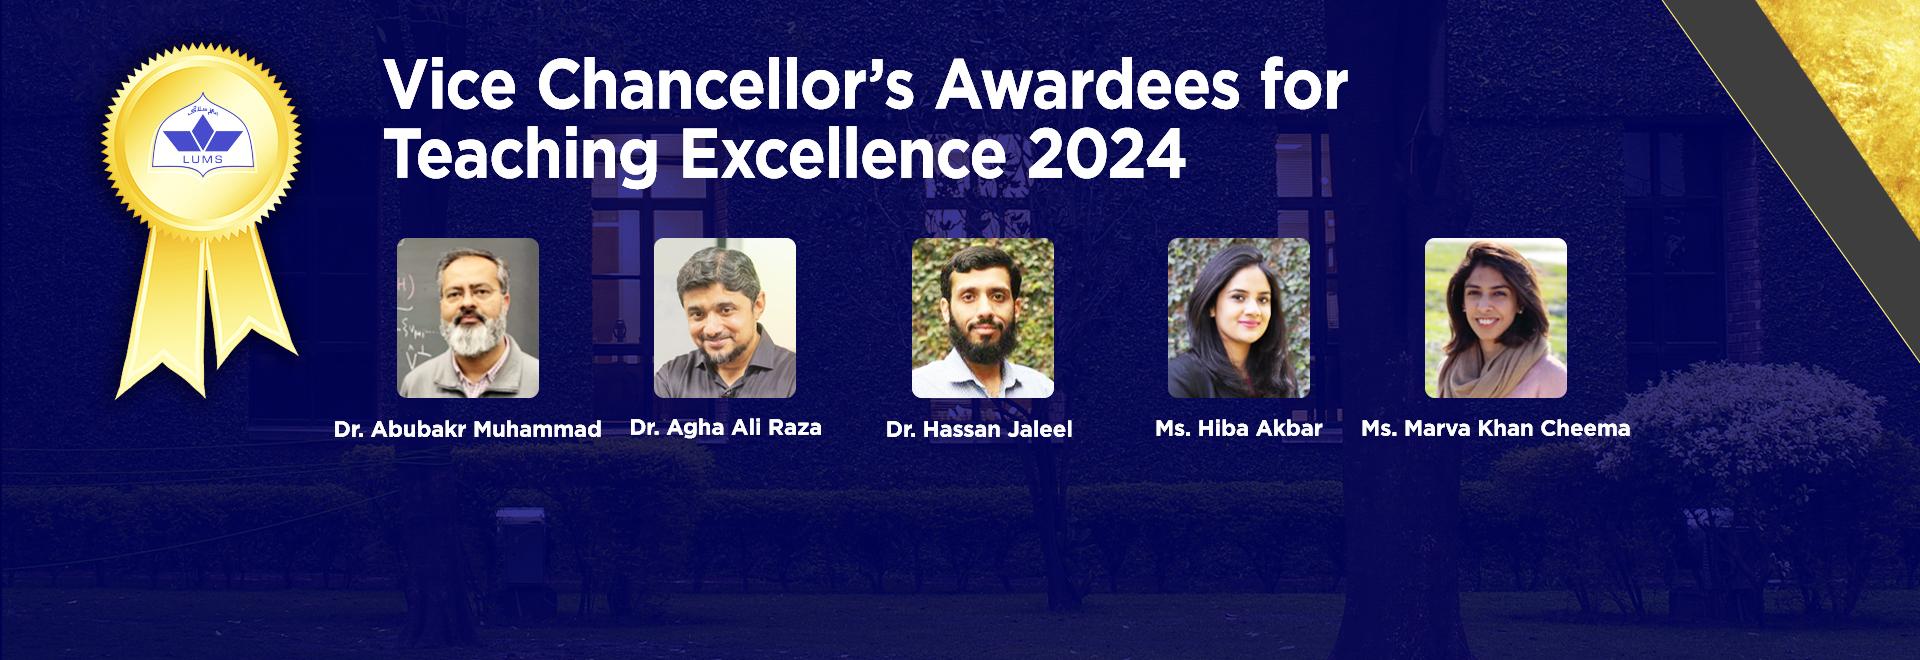 Meet the 2023-24 Winners of the Vice Chancellor’s Award for Teaching Excellence